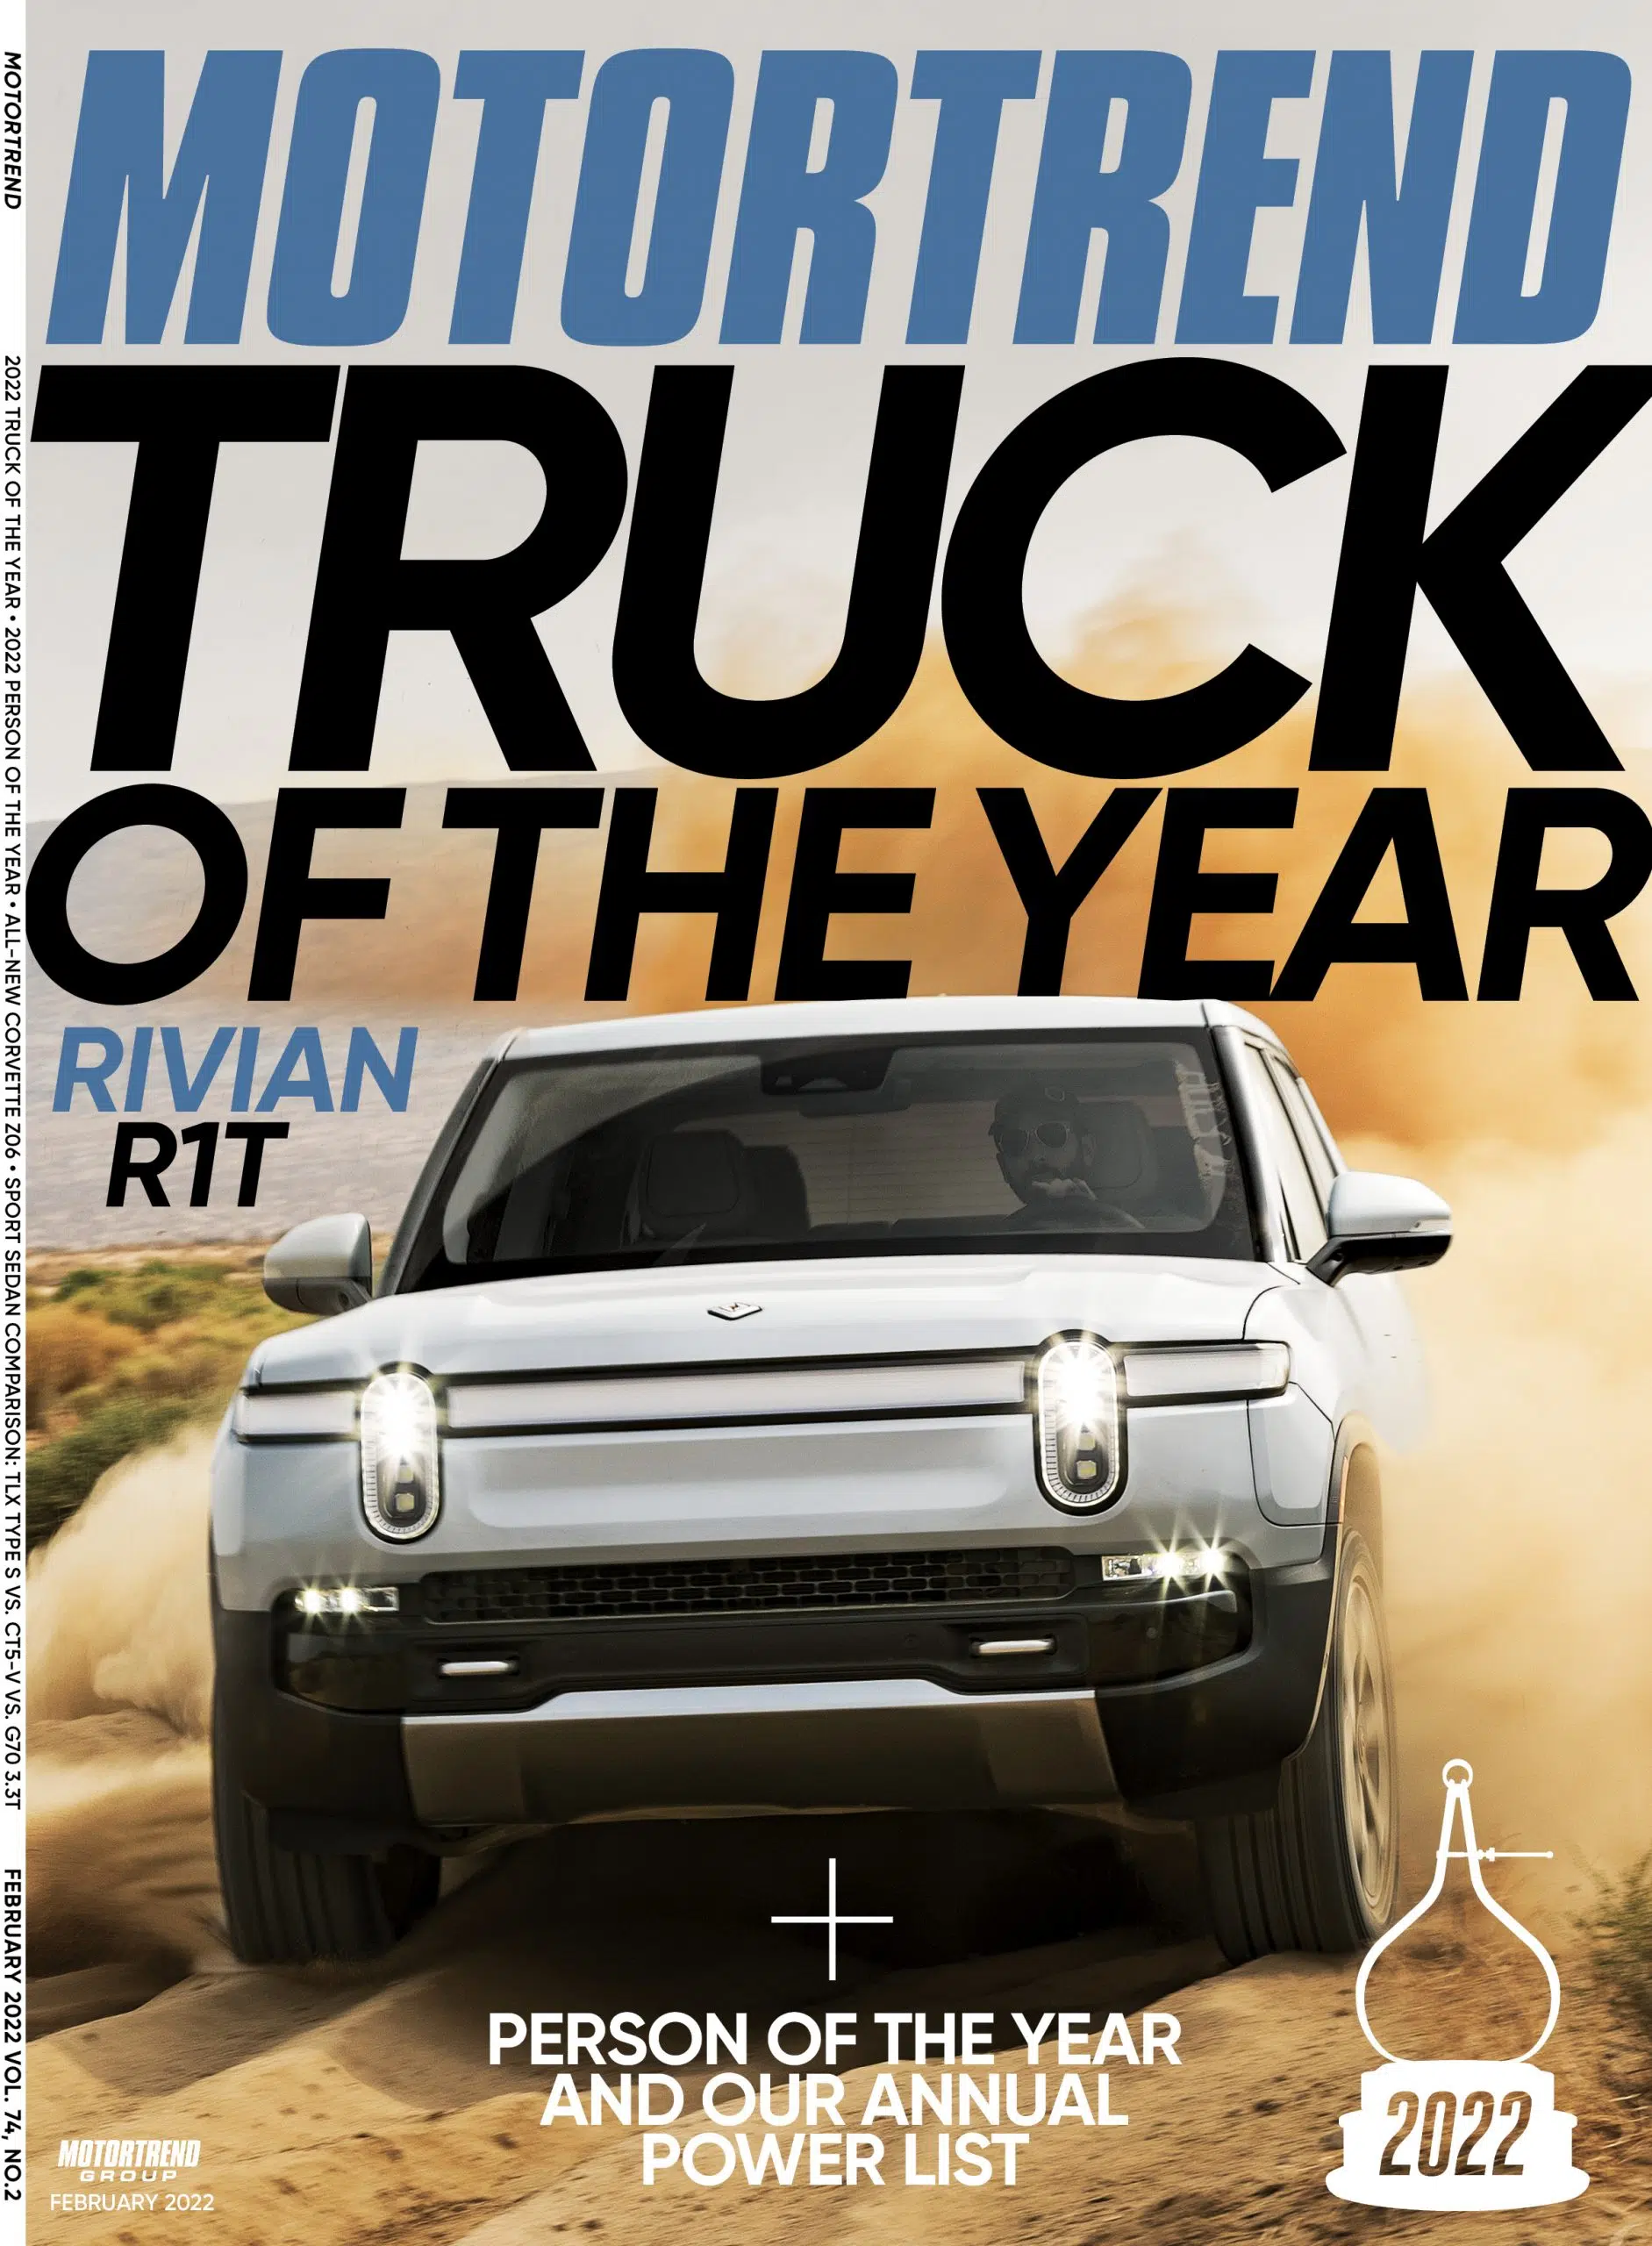 MotorTrend Names Rivian R1T as the 2022 Truck of the Year